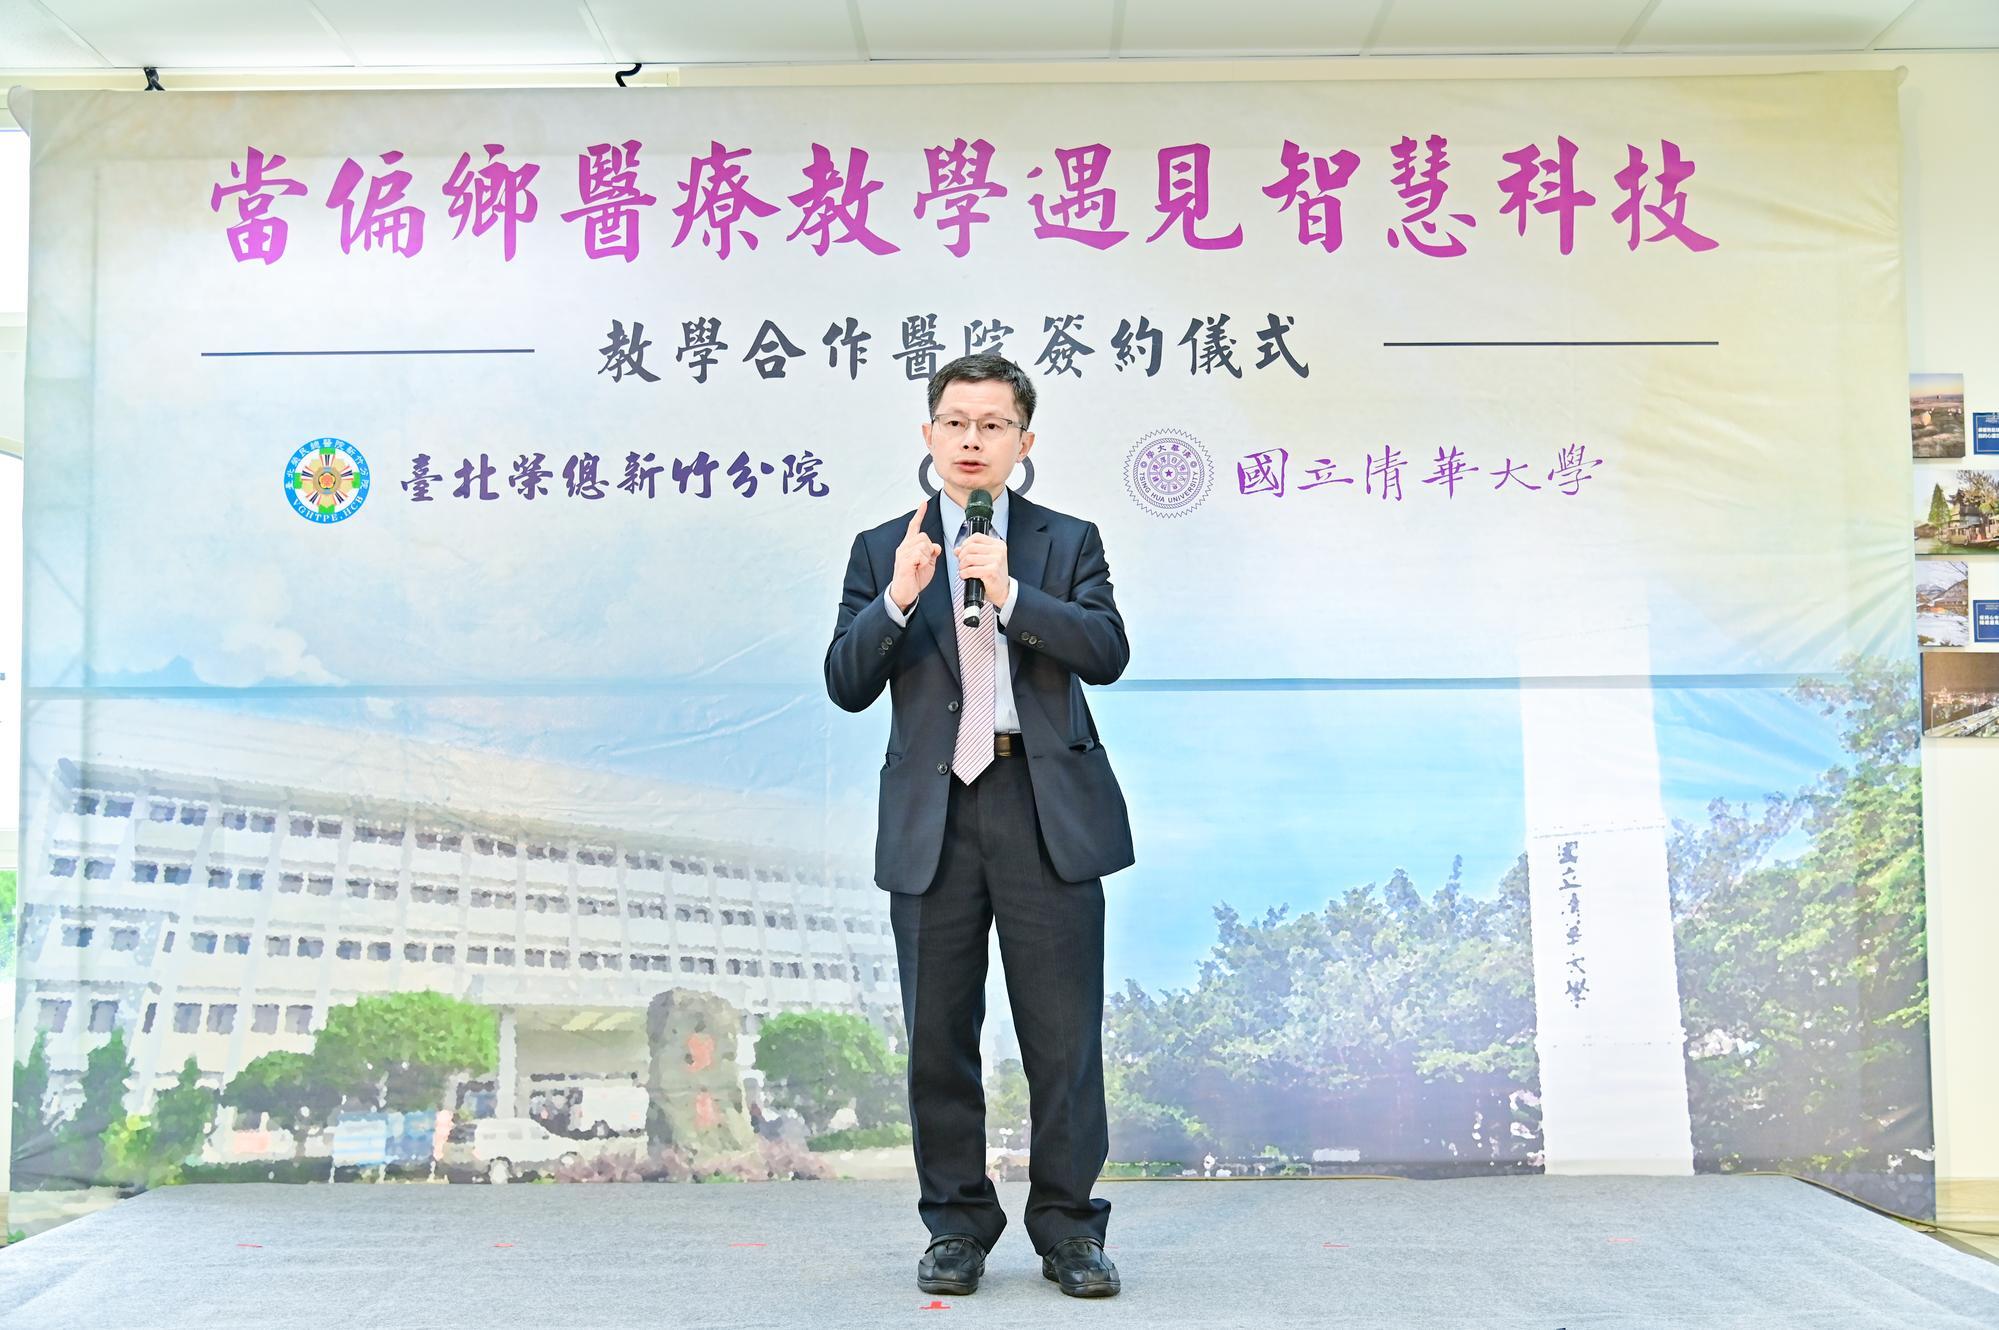 Lin Yung-yang said that training public-funded doctors is really important, and that the Ministry of Health and Welfare has decided to send one-fifth of public-funded doctors to veterans hospitals.